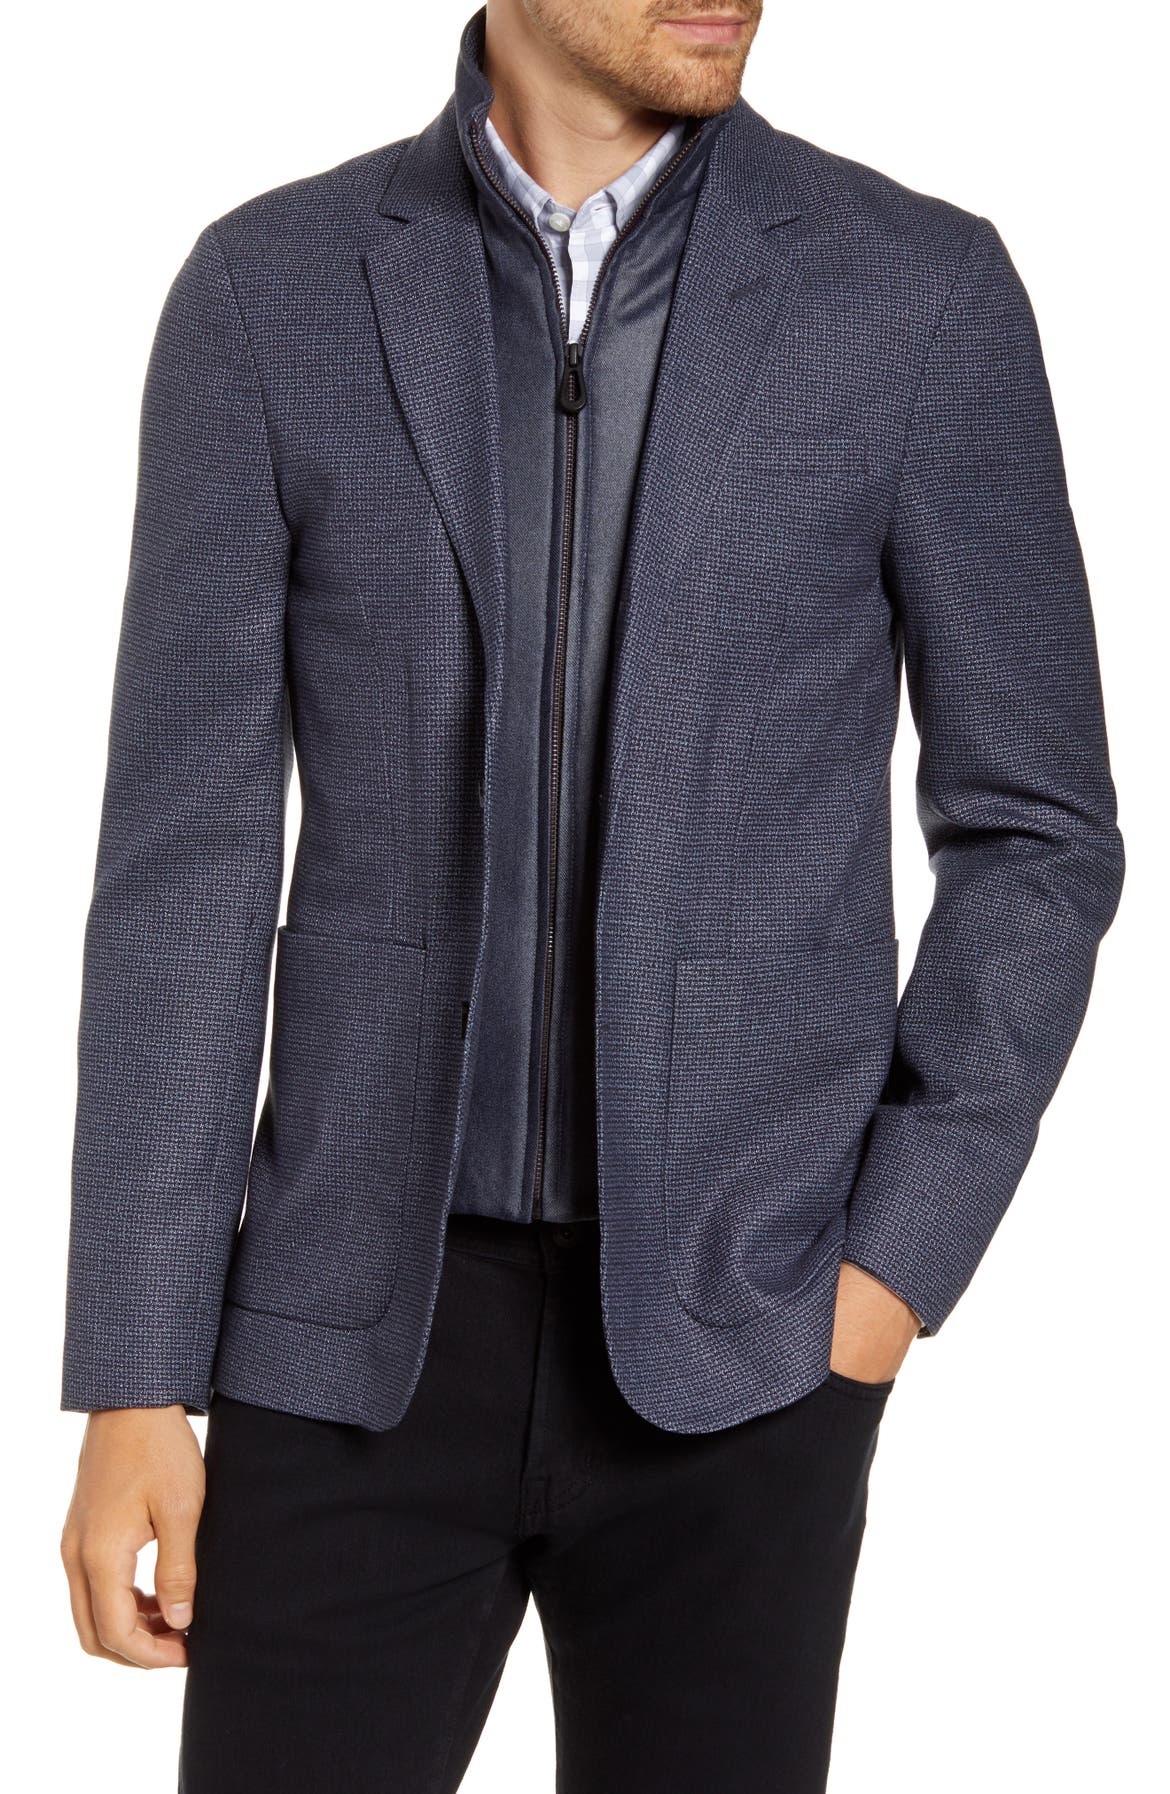 Ted Baker London Sport Coat with Removable Bib | Nordstrom